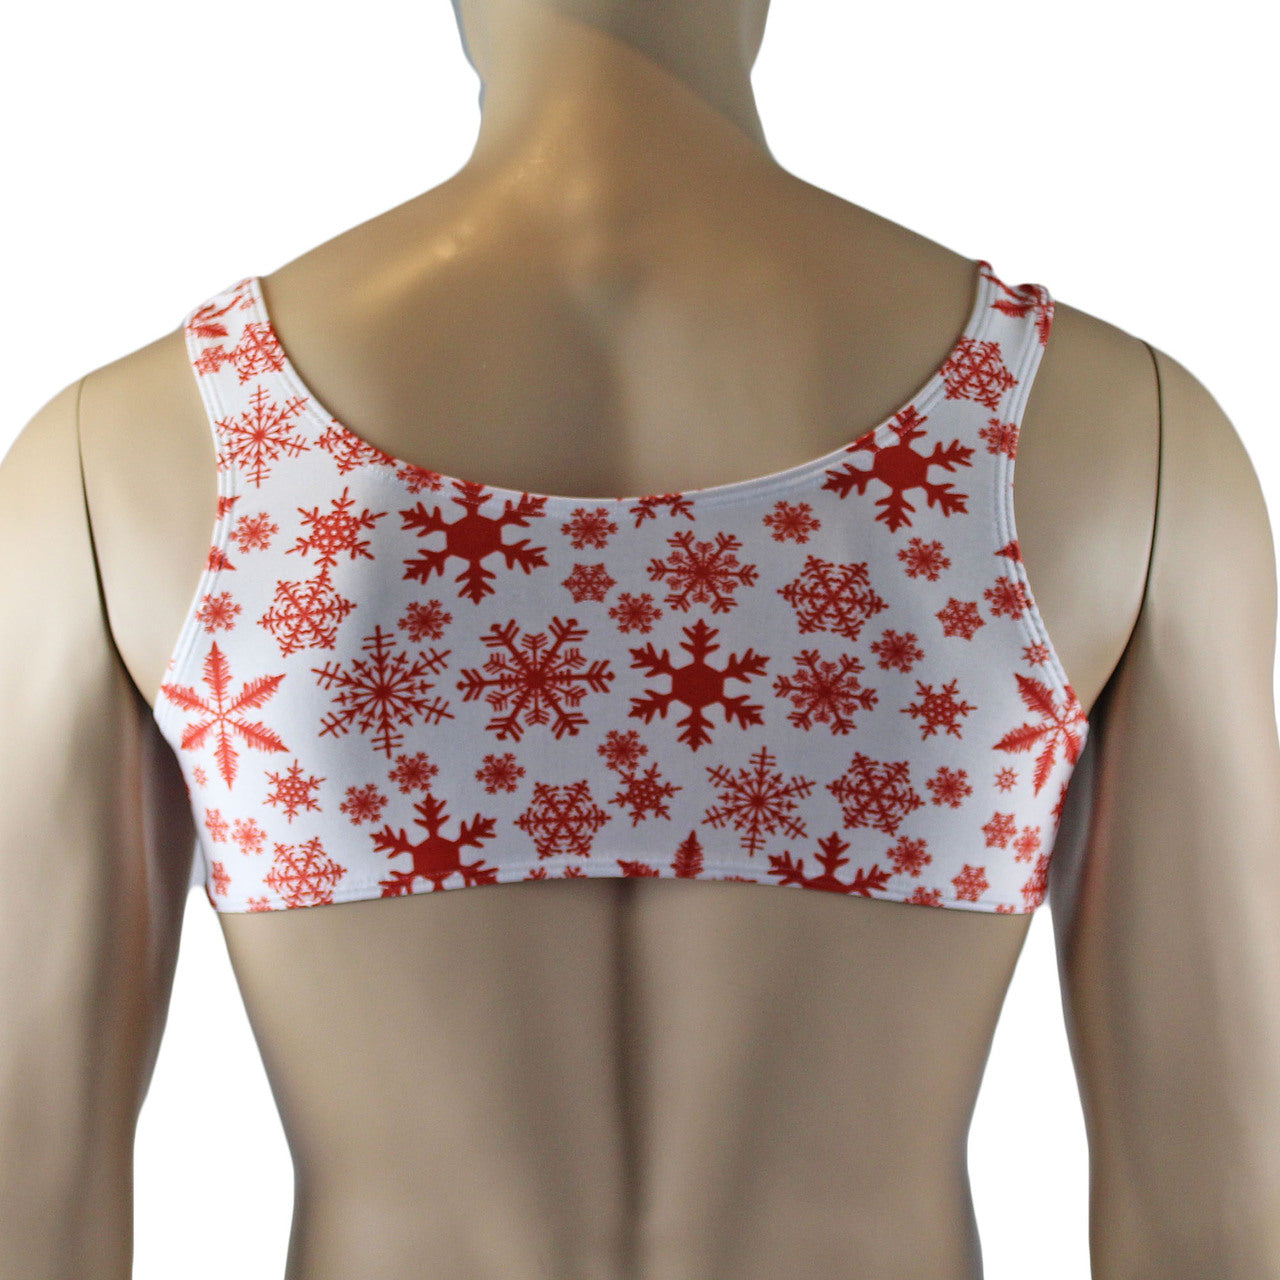 Mens Lingerie Snowflake Print Spandex Bra Top White and Red